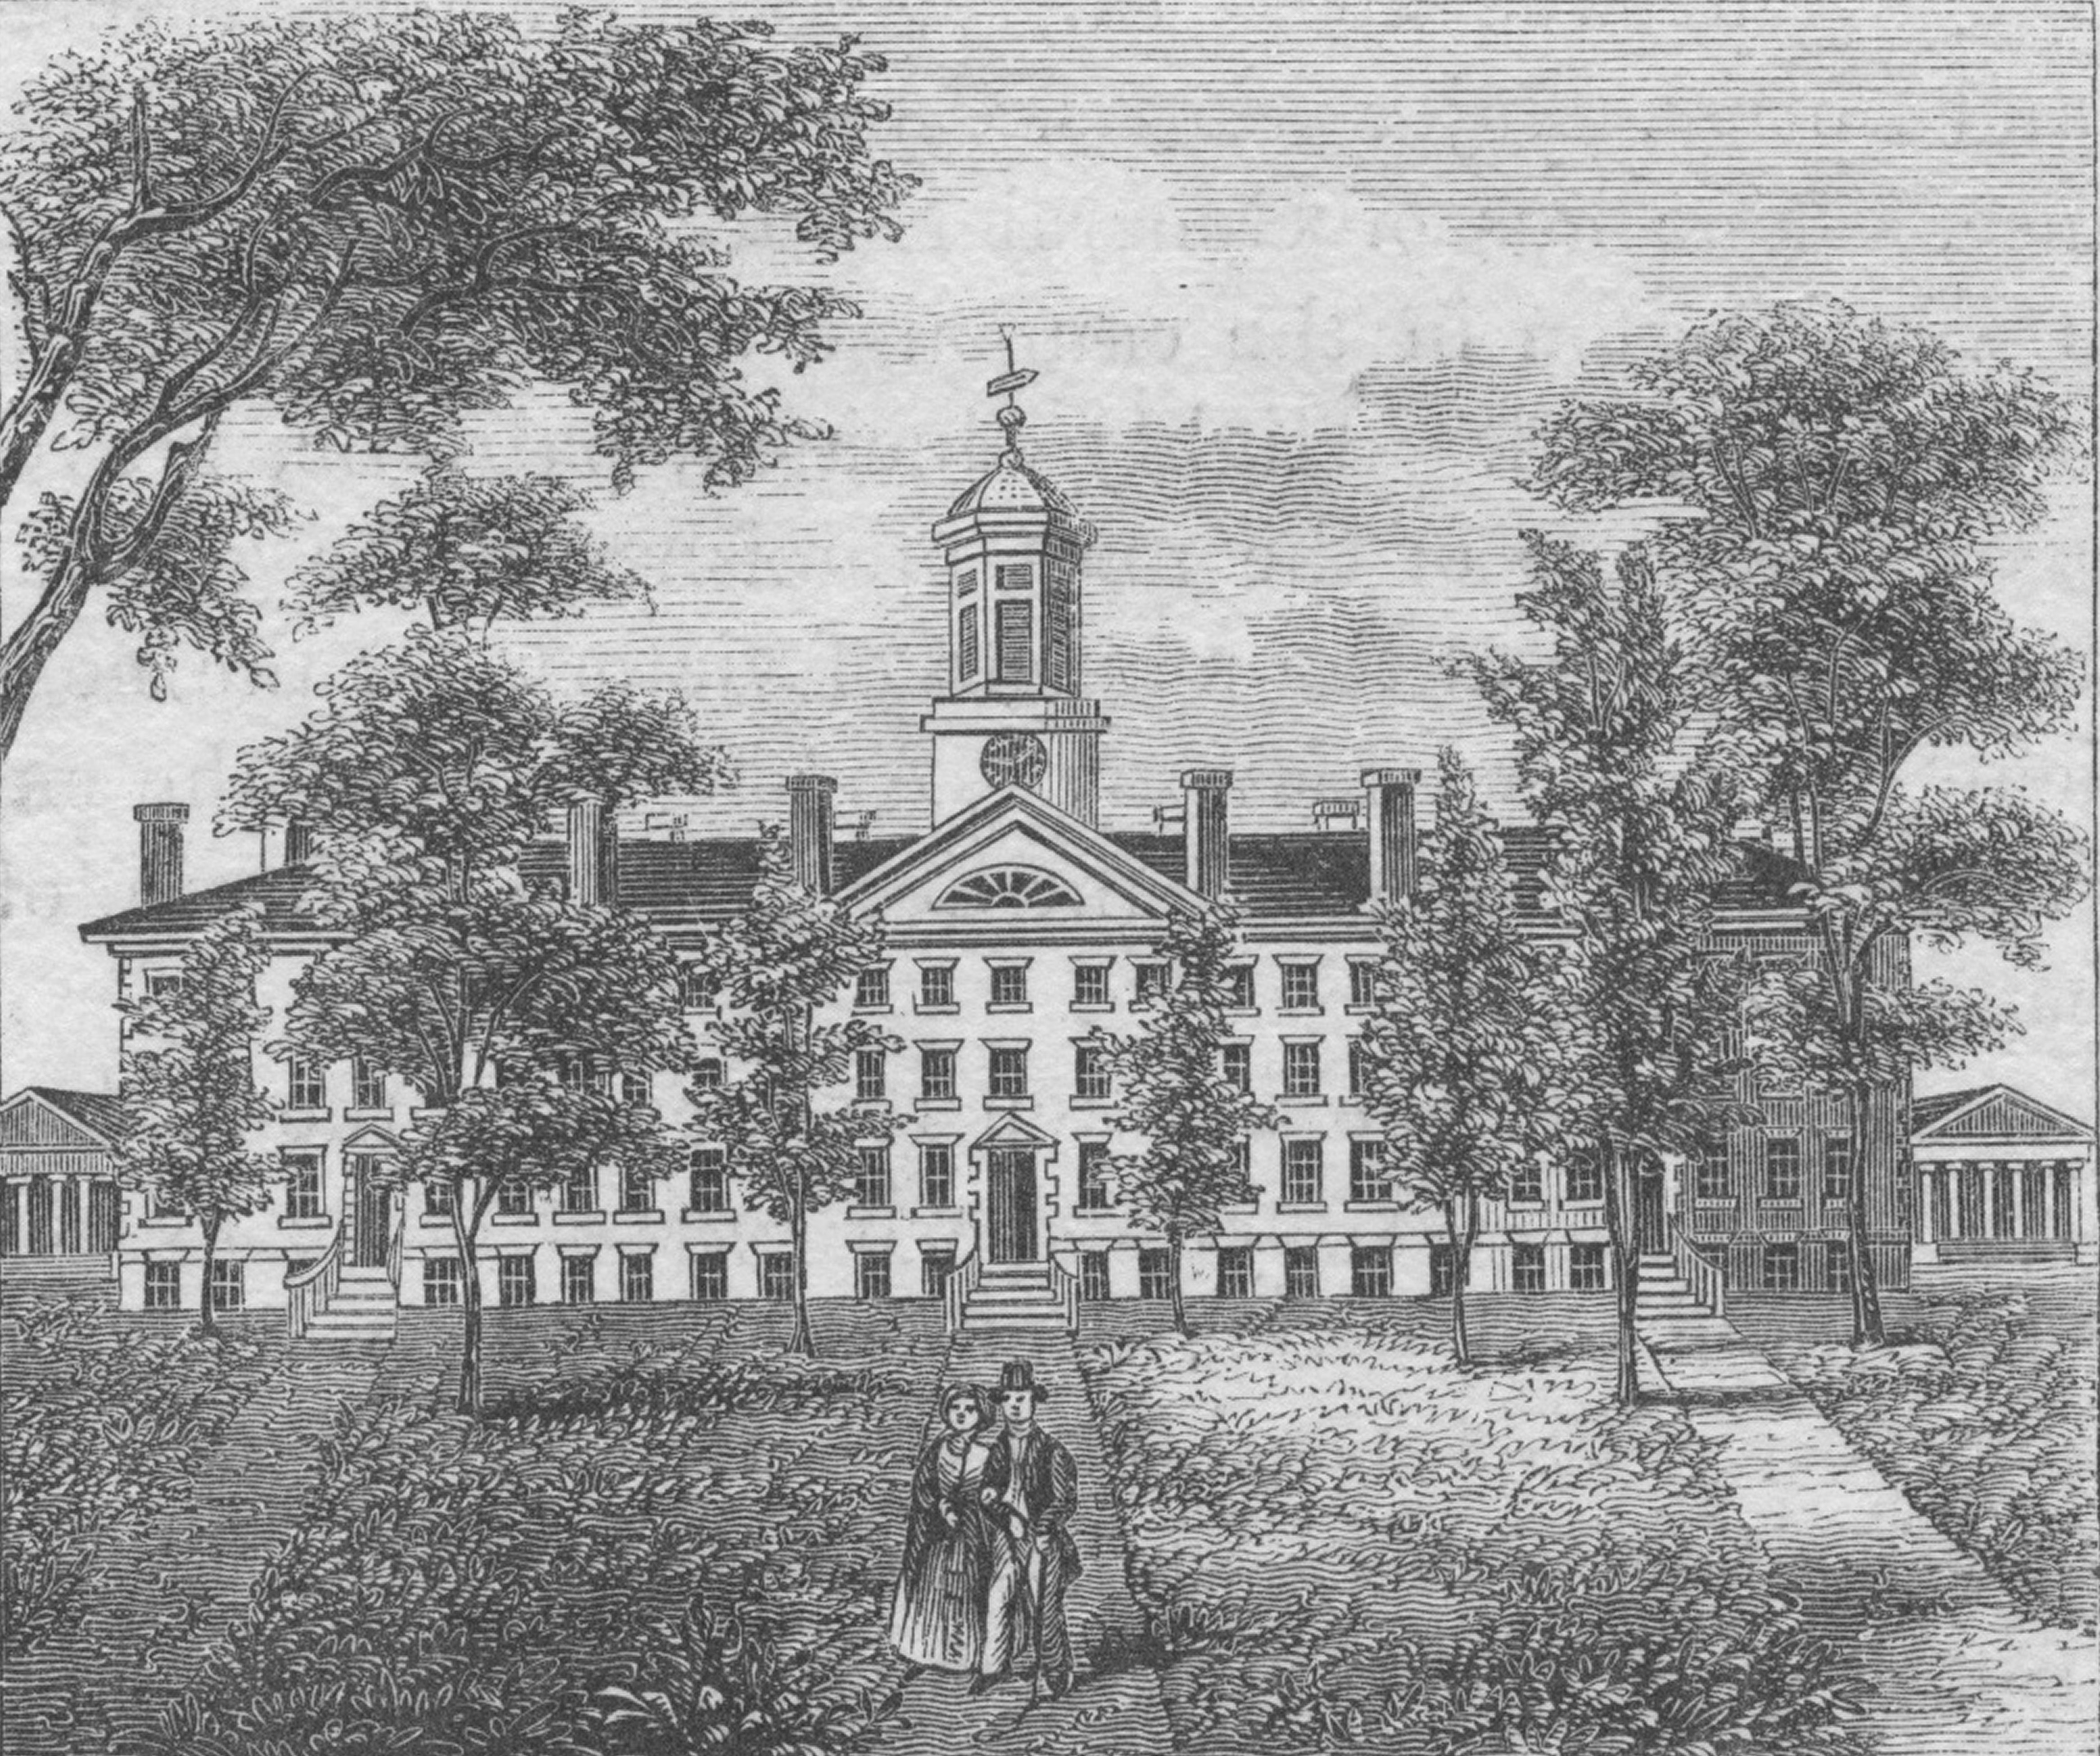 An engraving (circa 1800) depicting the exterior of Nassau Hall at Princeton University, which was constructed in 1756 and is the oldest building on the campus. (Smith Collection/Gado—Getty Images)